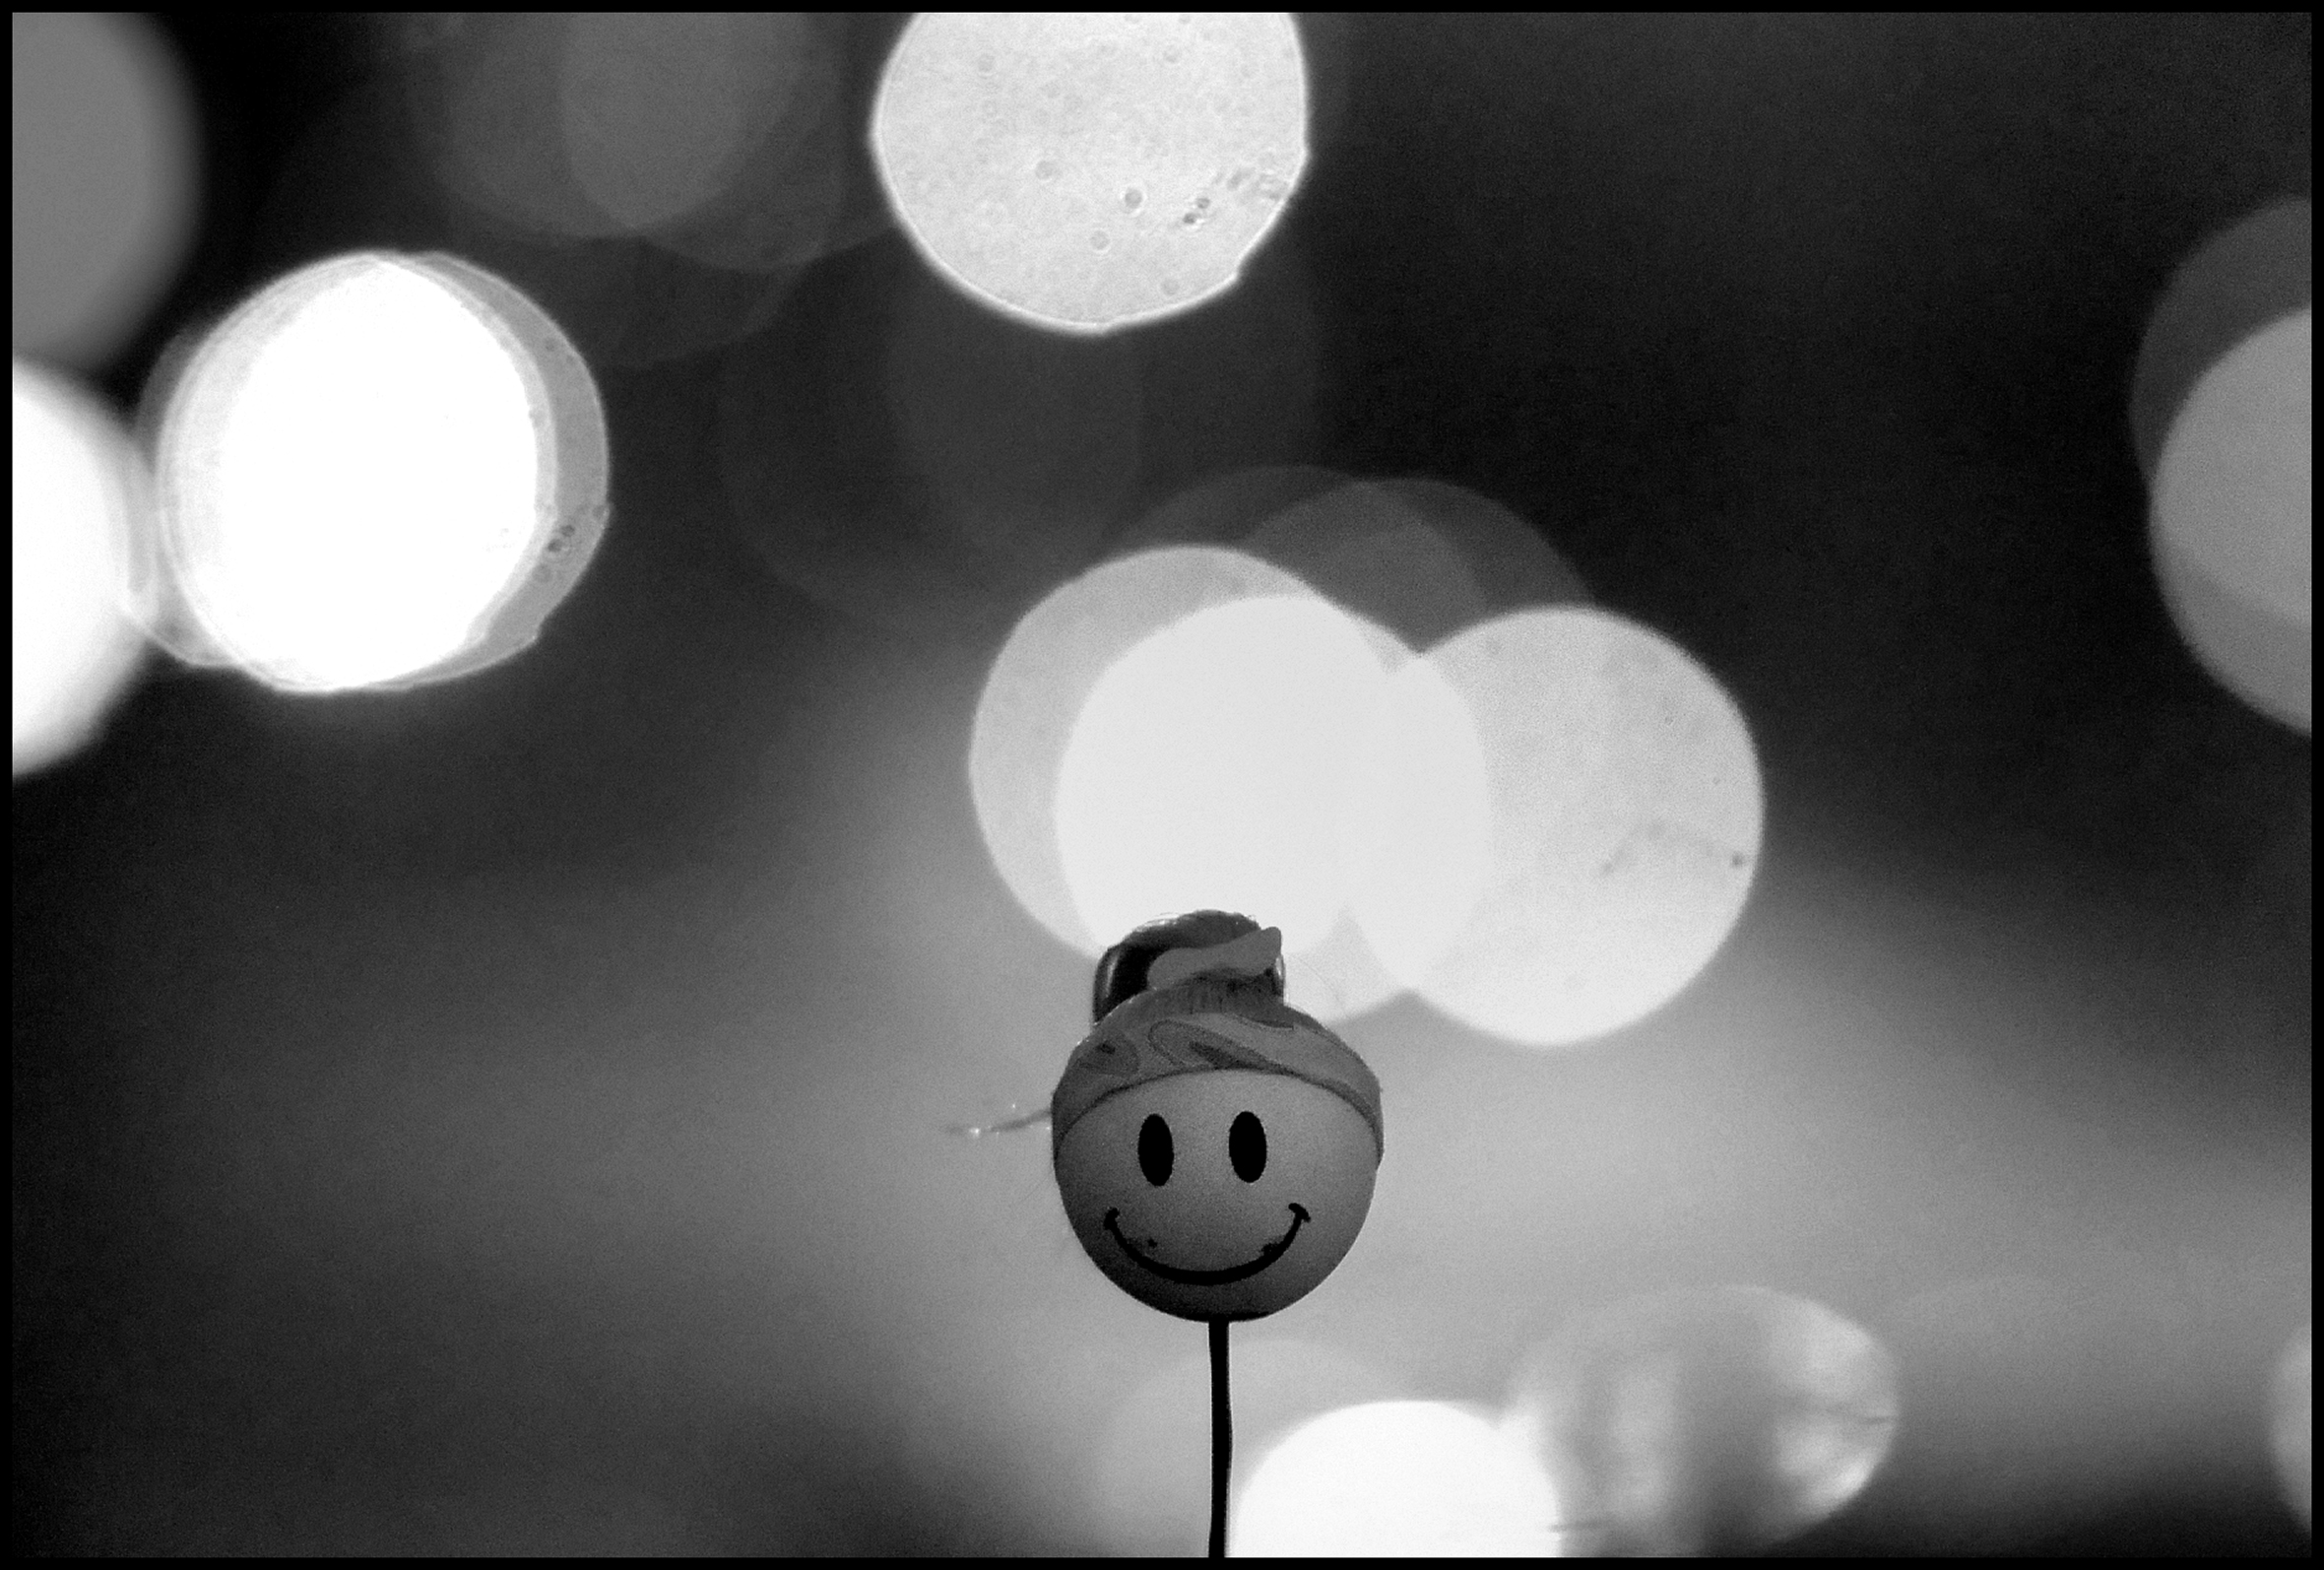 A smiley face on a ping-pong ball on a stick with blurry spotlights in the background.